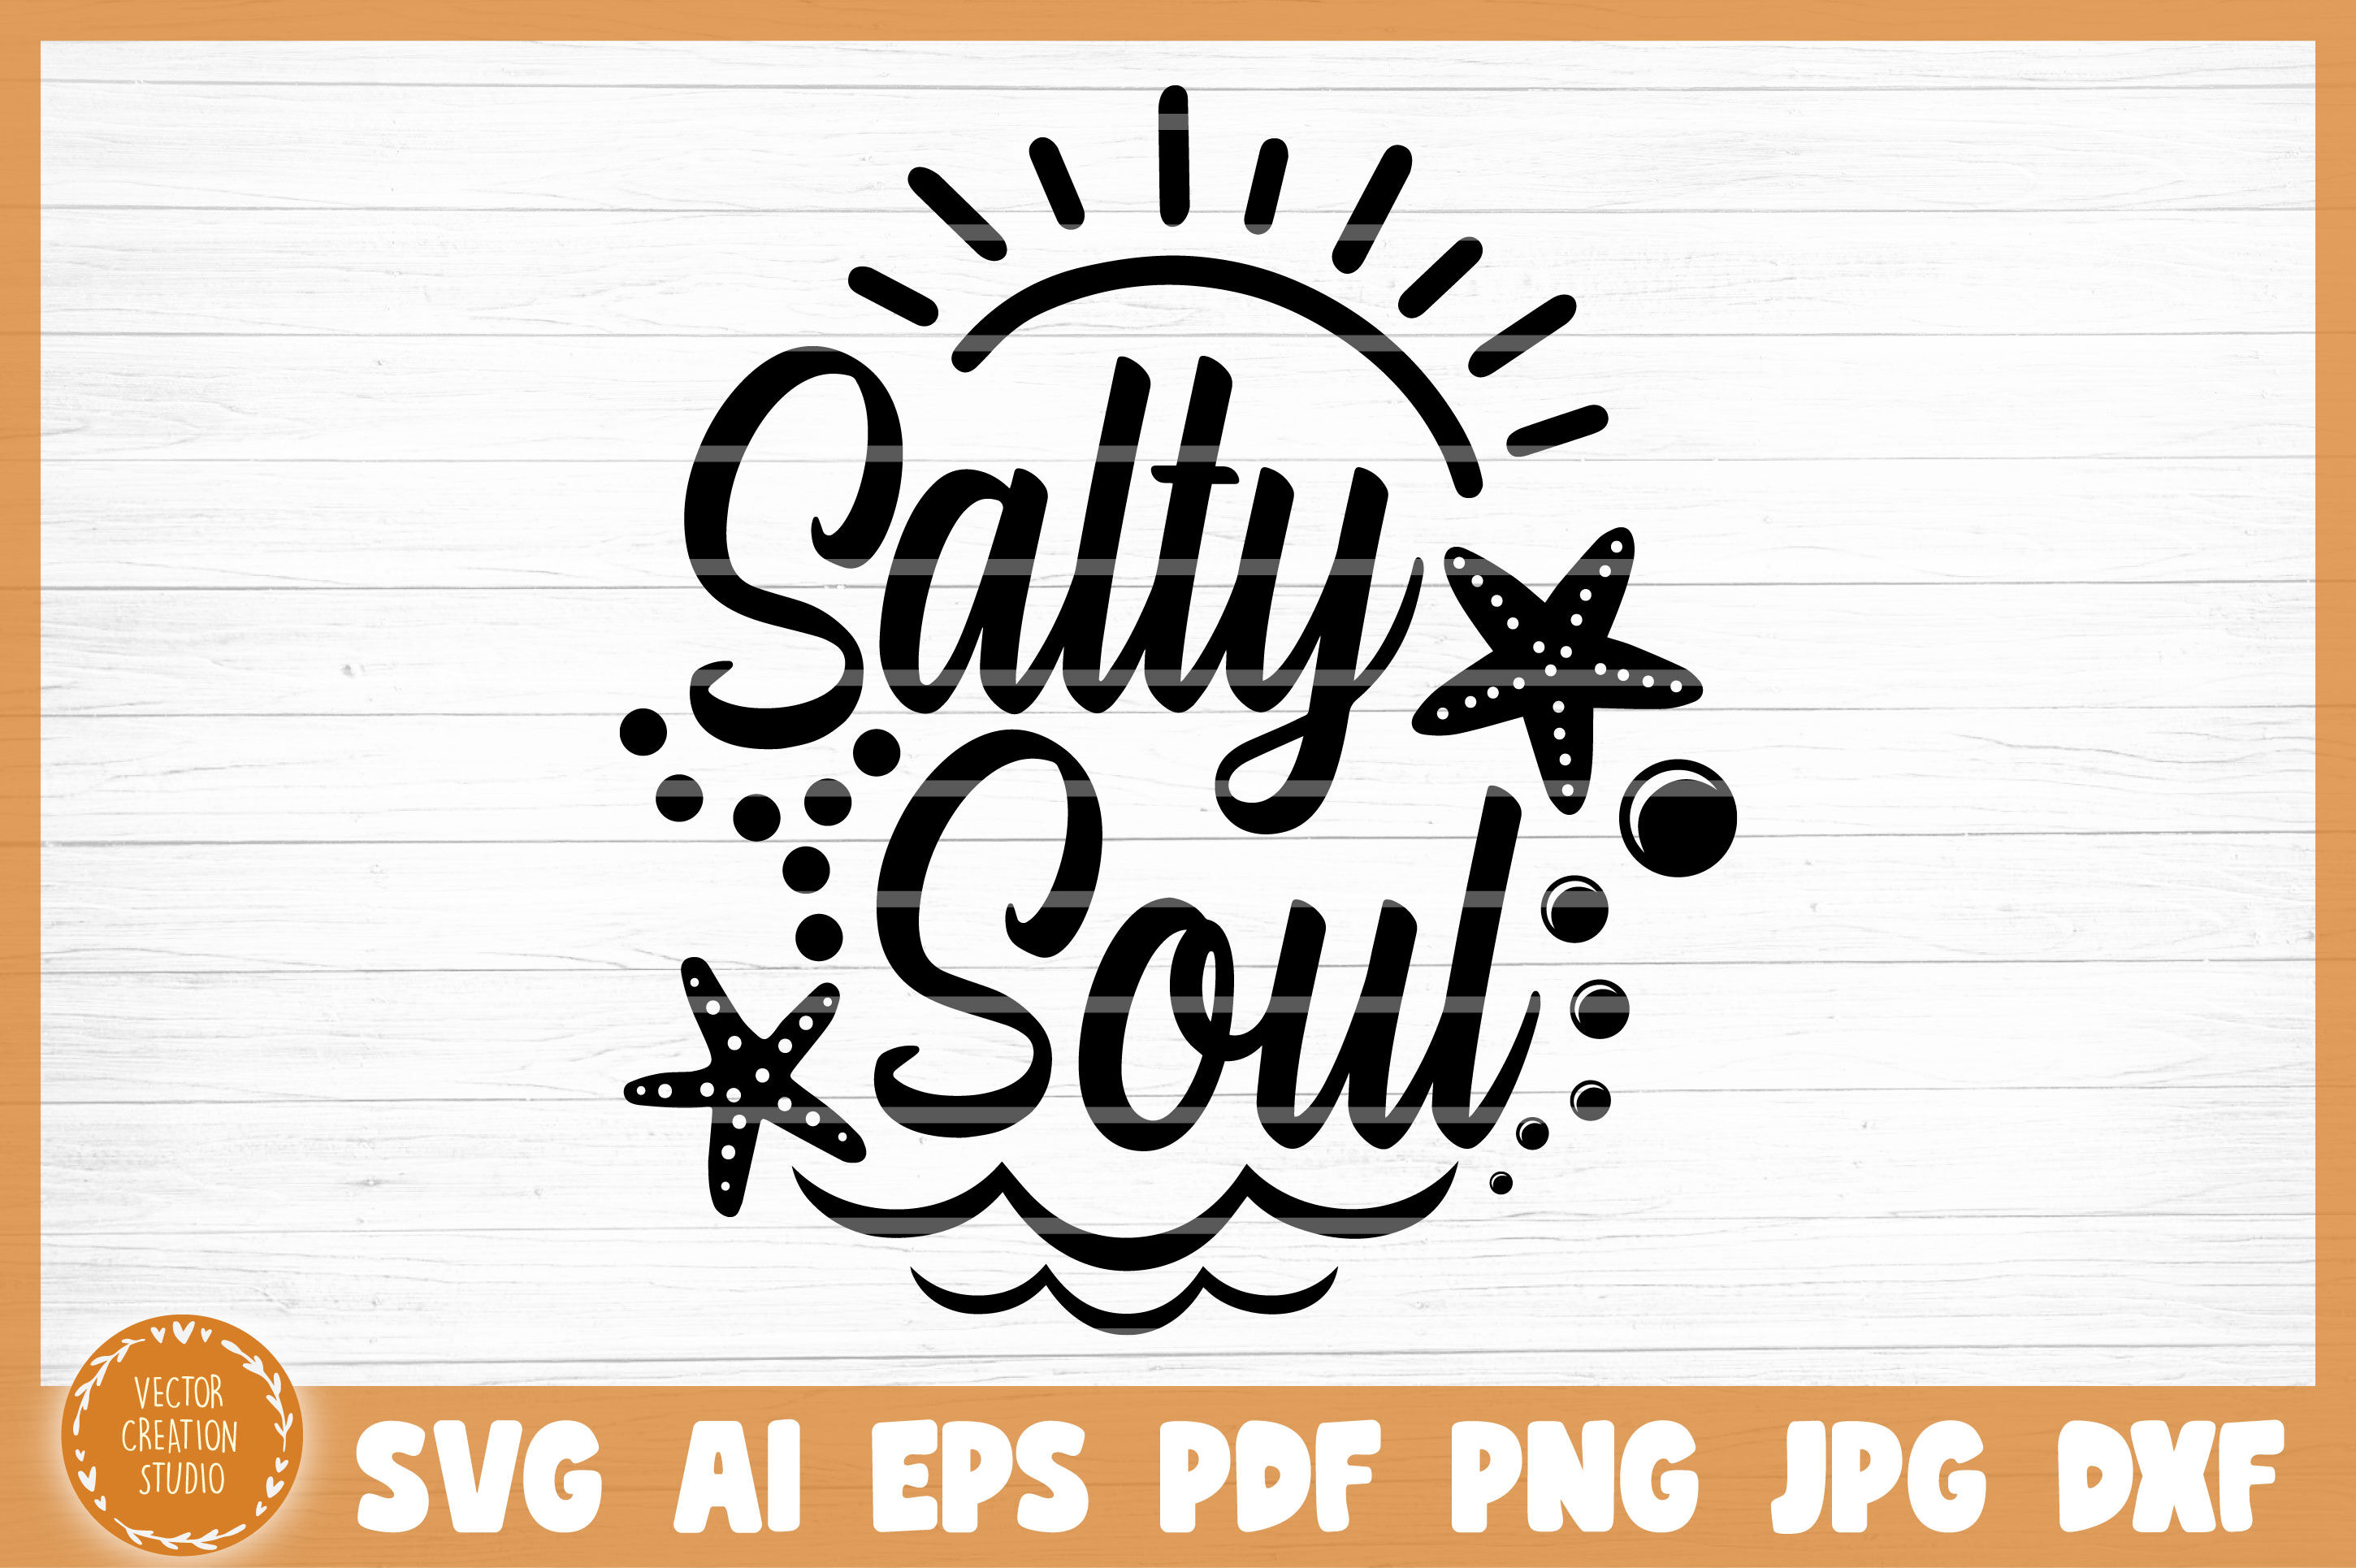 Download Salty Soul Summer Svg Cut File By Vectorcreationstudio Thehungryjpeg Com